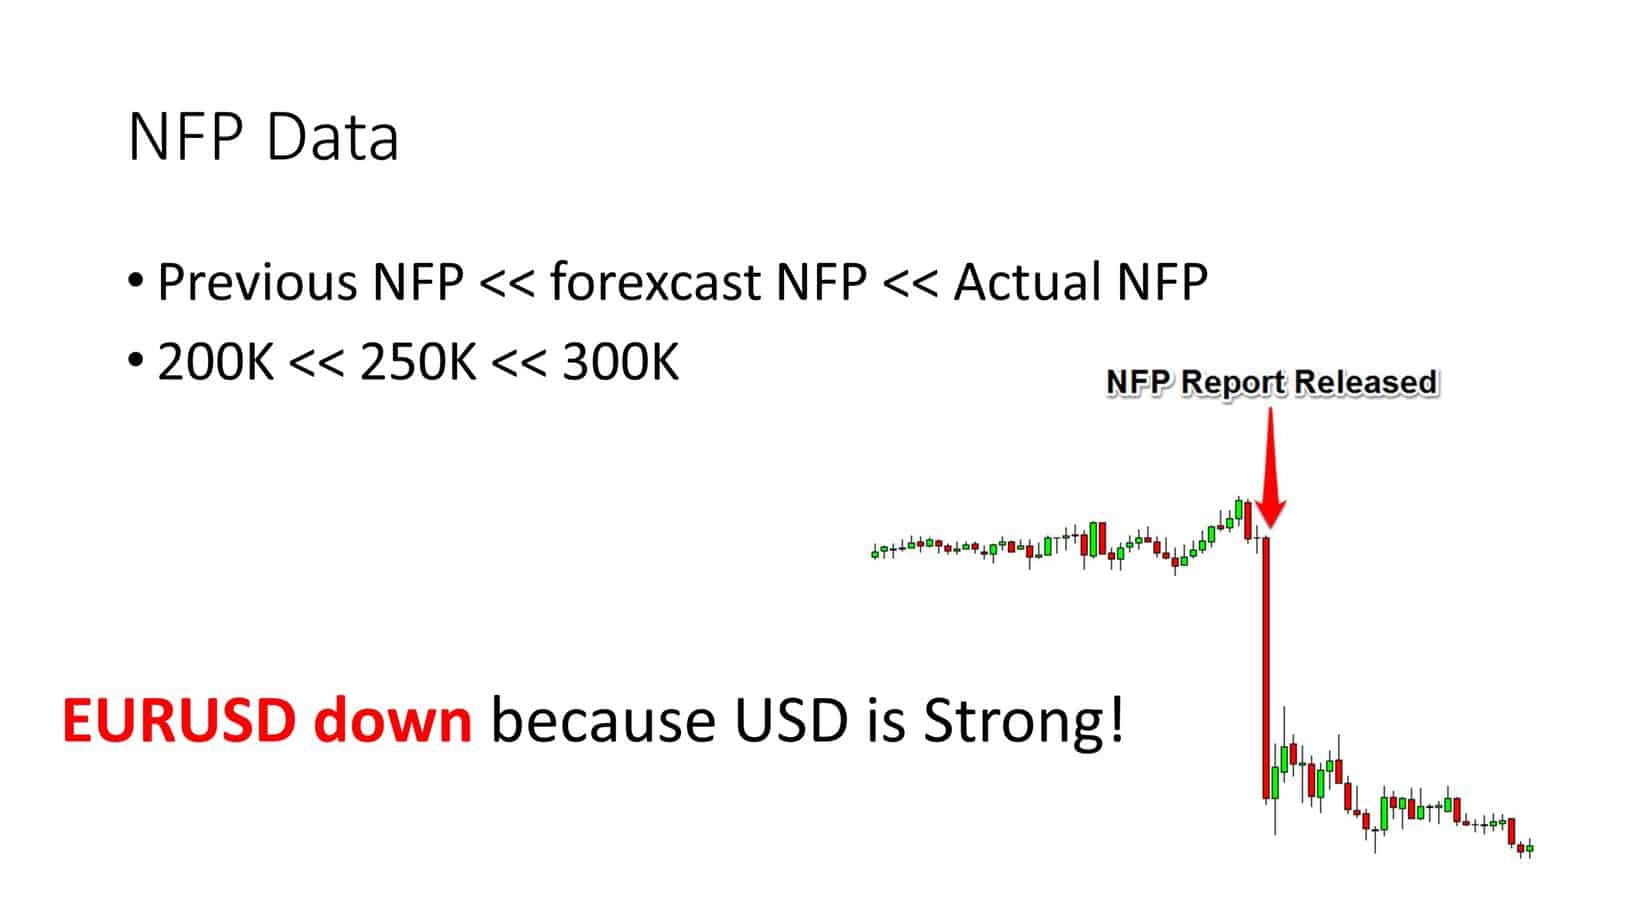 eurusd price during NFP report example